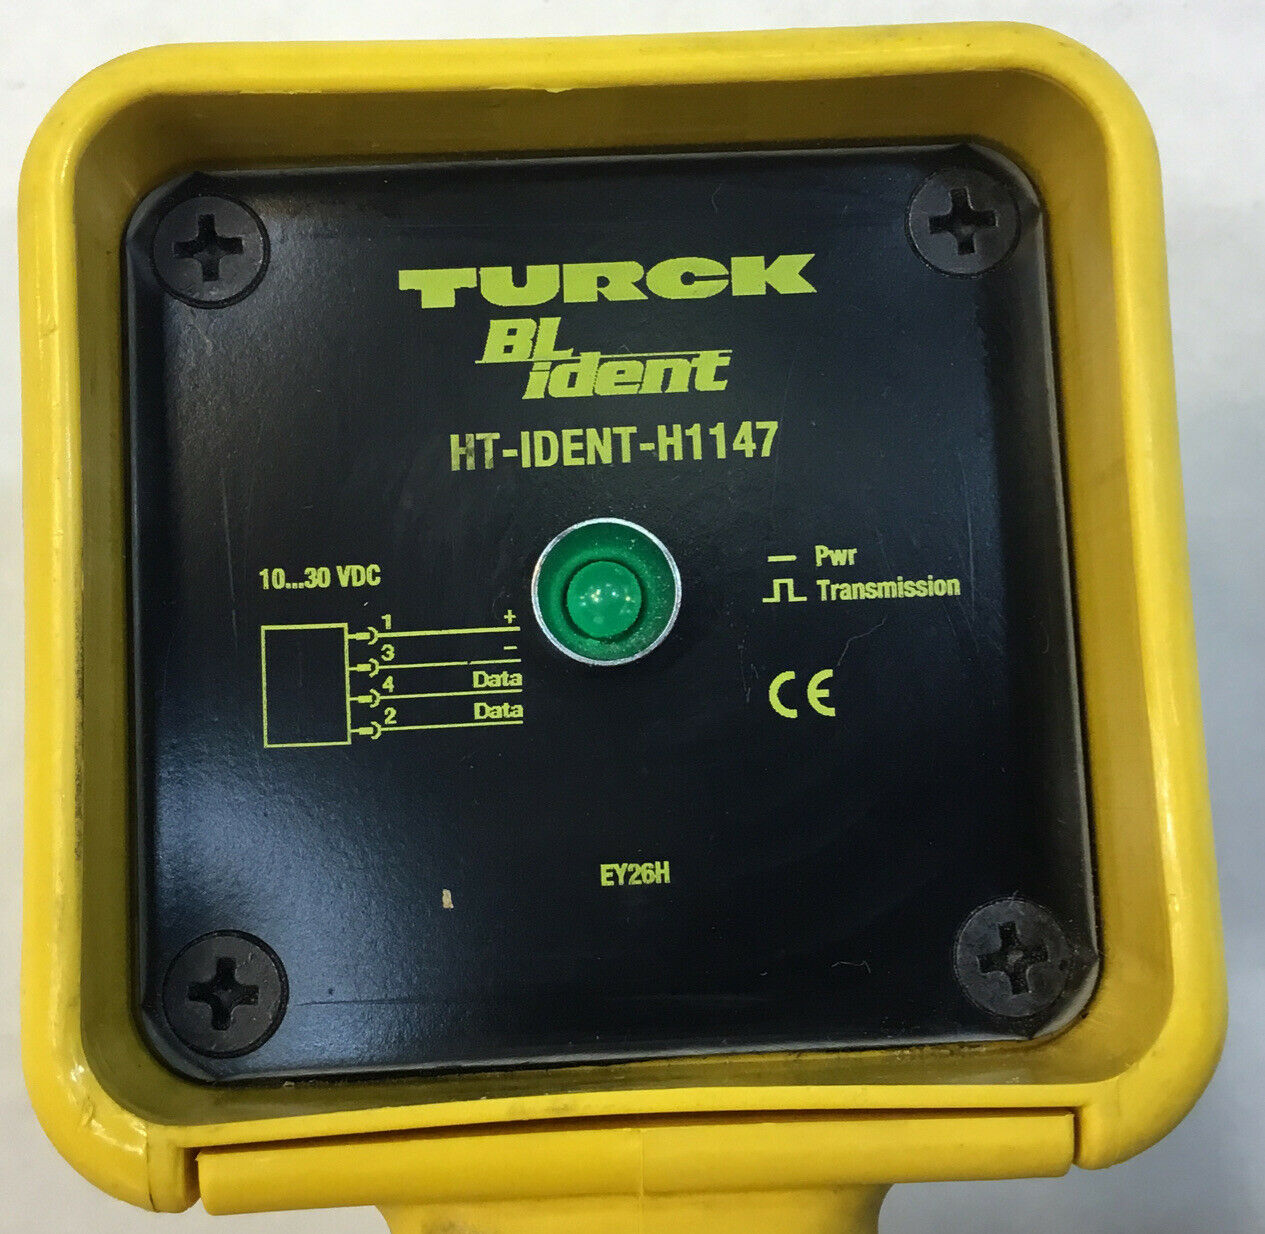 Turck - HT-IDENT-H1147 Handheld Read/Write Head w/ RK4.4T-2-RS4.4T Cable      5D